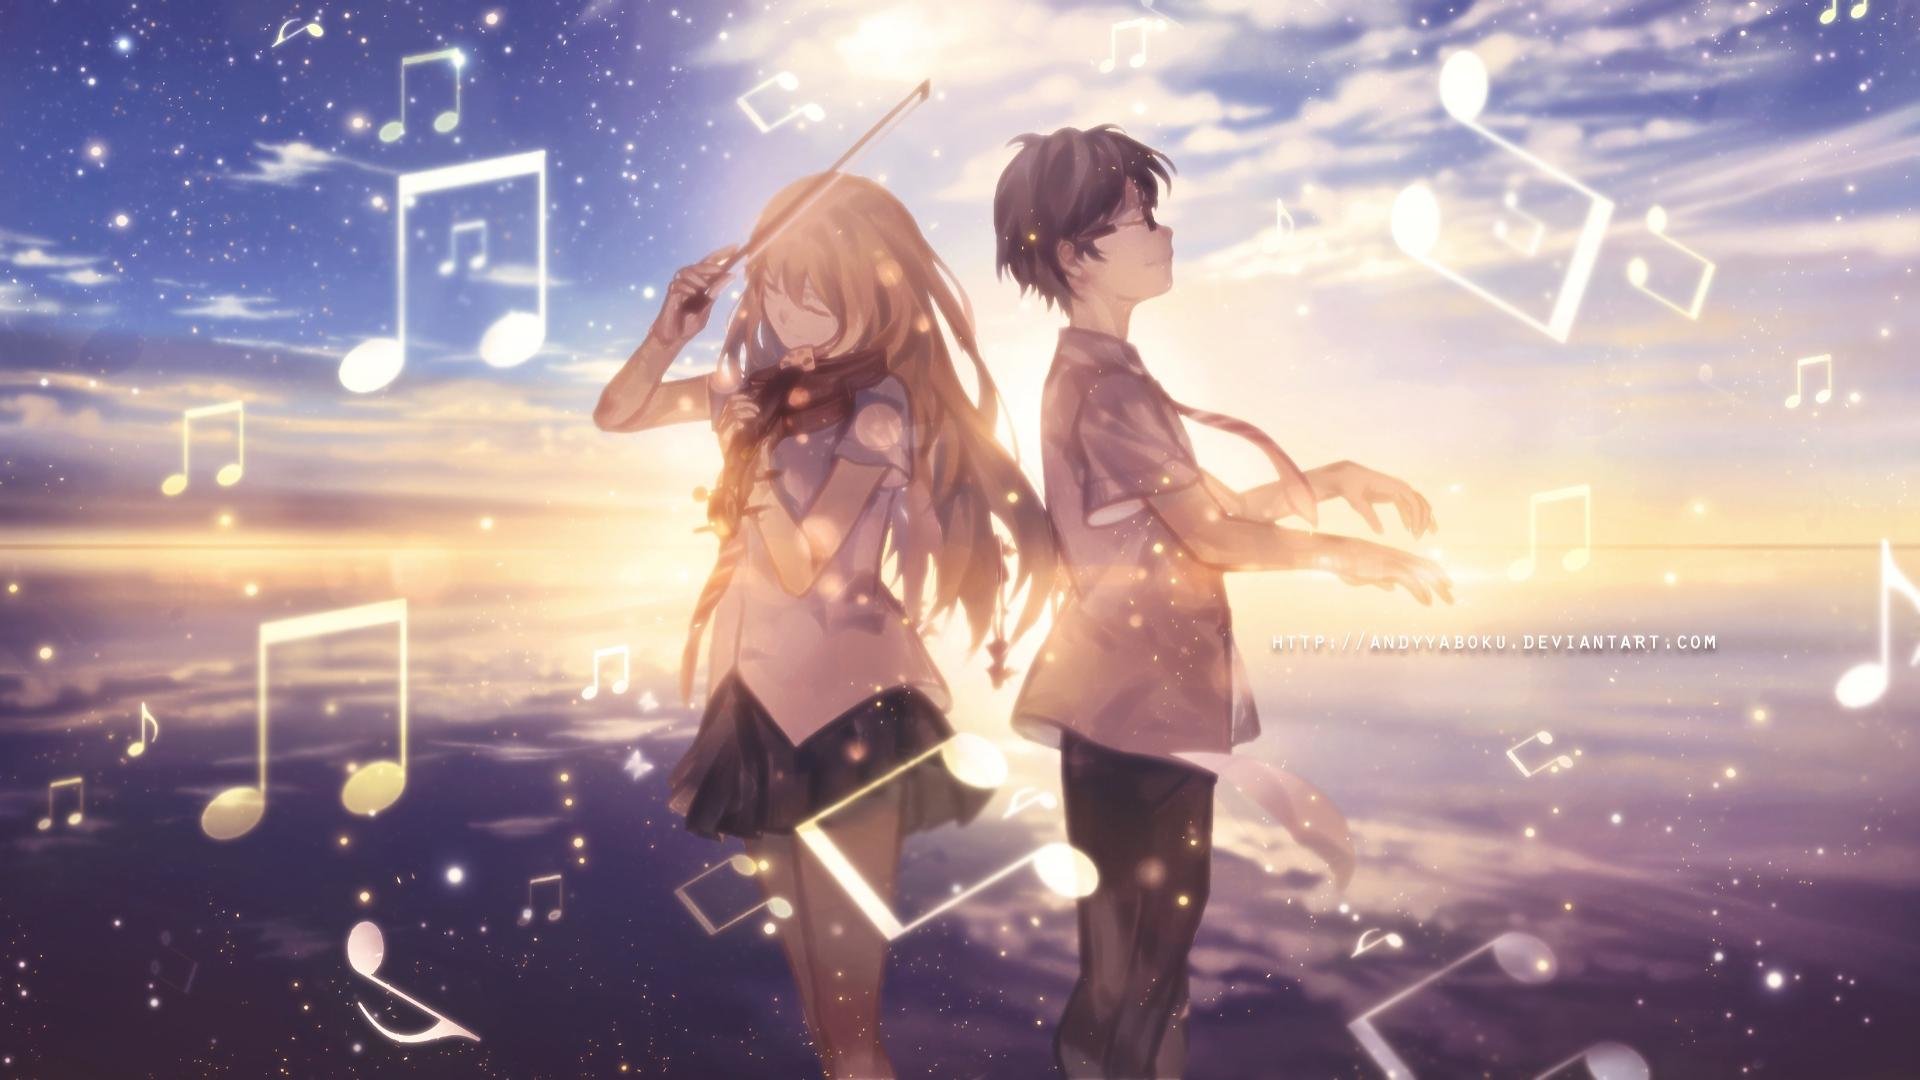 Your Lie in April Wallpapers.